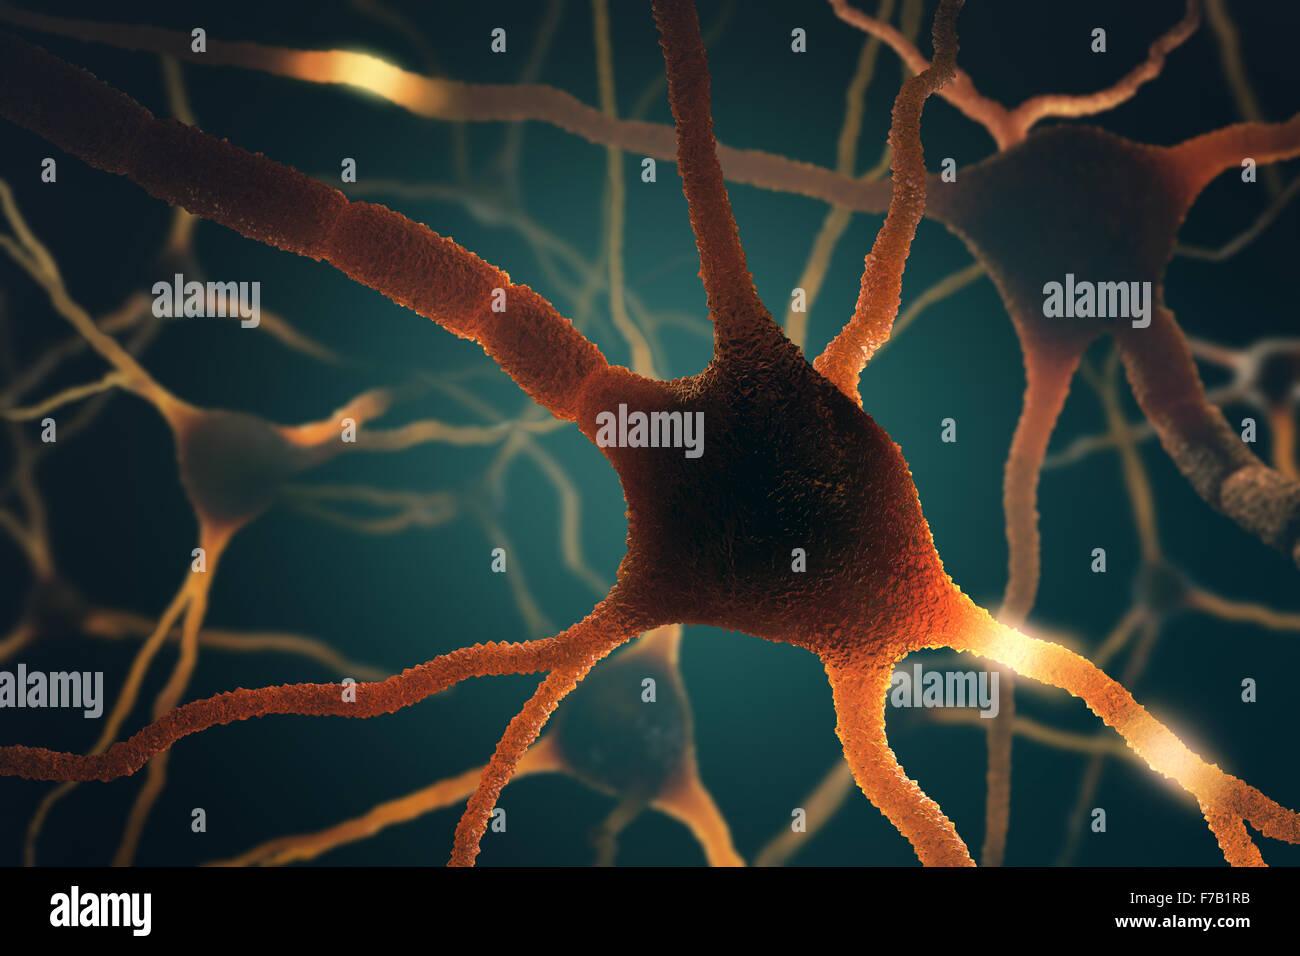 Image concept of neurons interconnected in a complex brain network. Stock Photo